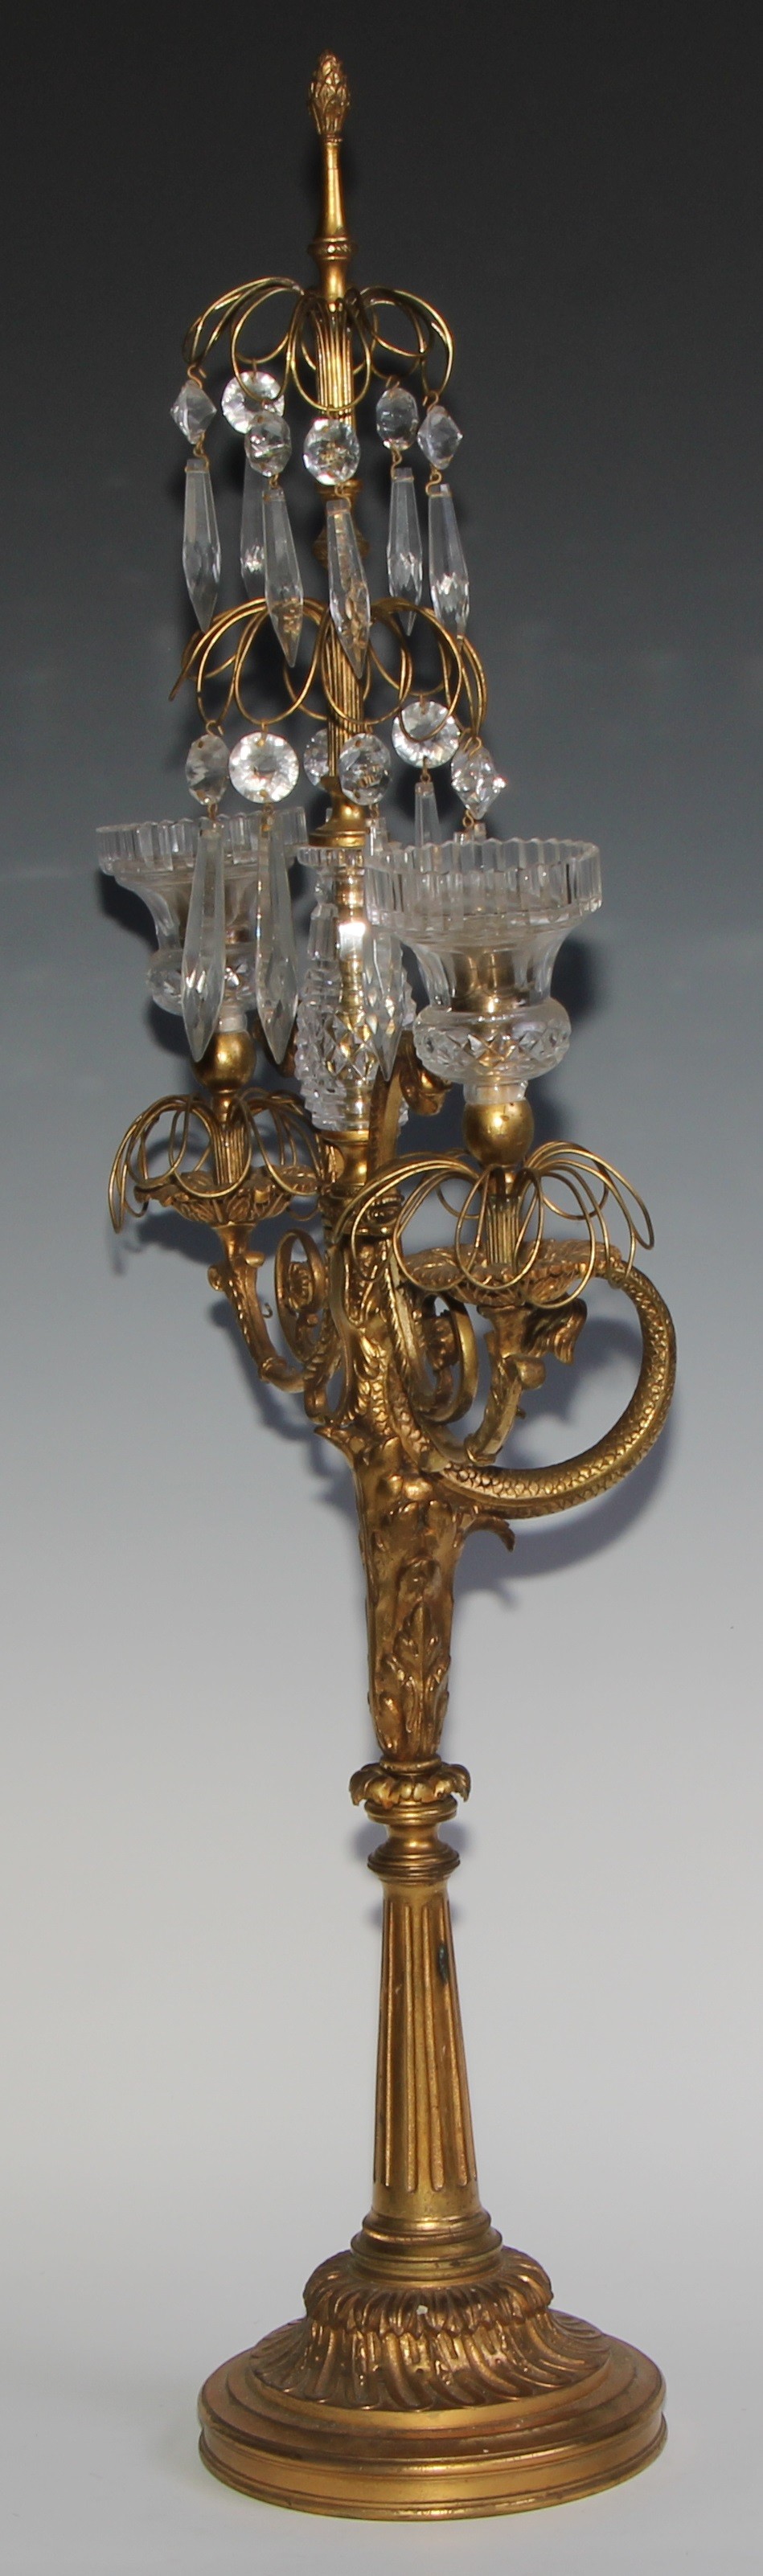 A 19th century French gilt bronze and hobnail-cut glass two-branch lustre candelabra, cast with a - Image 4 of 5